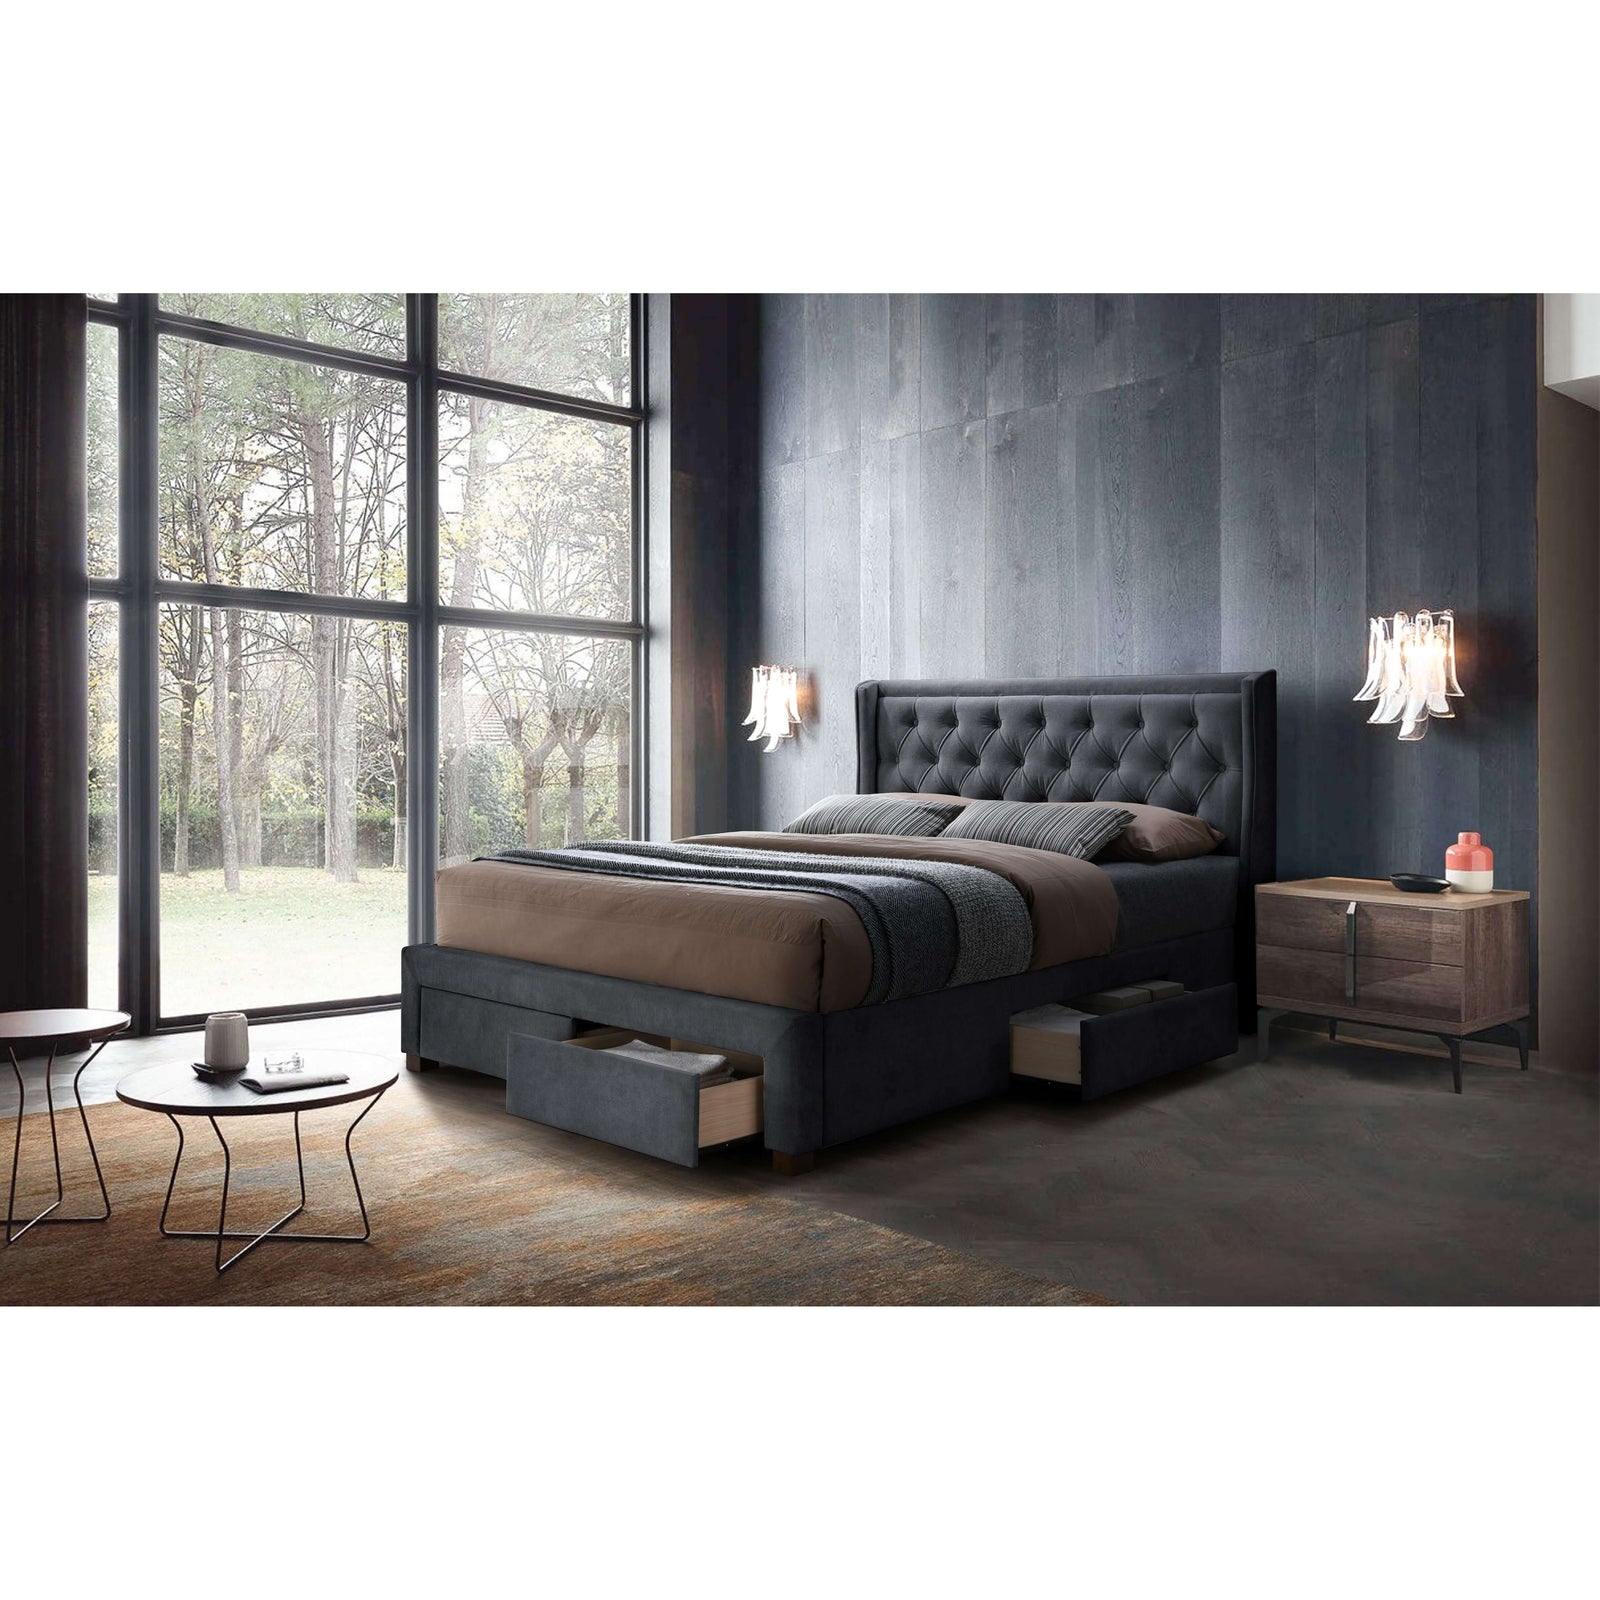 Softouch King Size Bed Frame Timber Mattress Base With Storage Drawers - Grey-Upinteriors